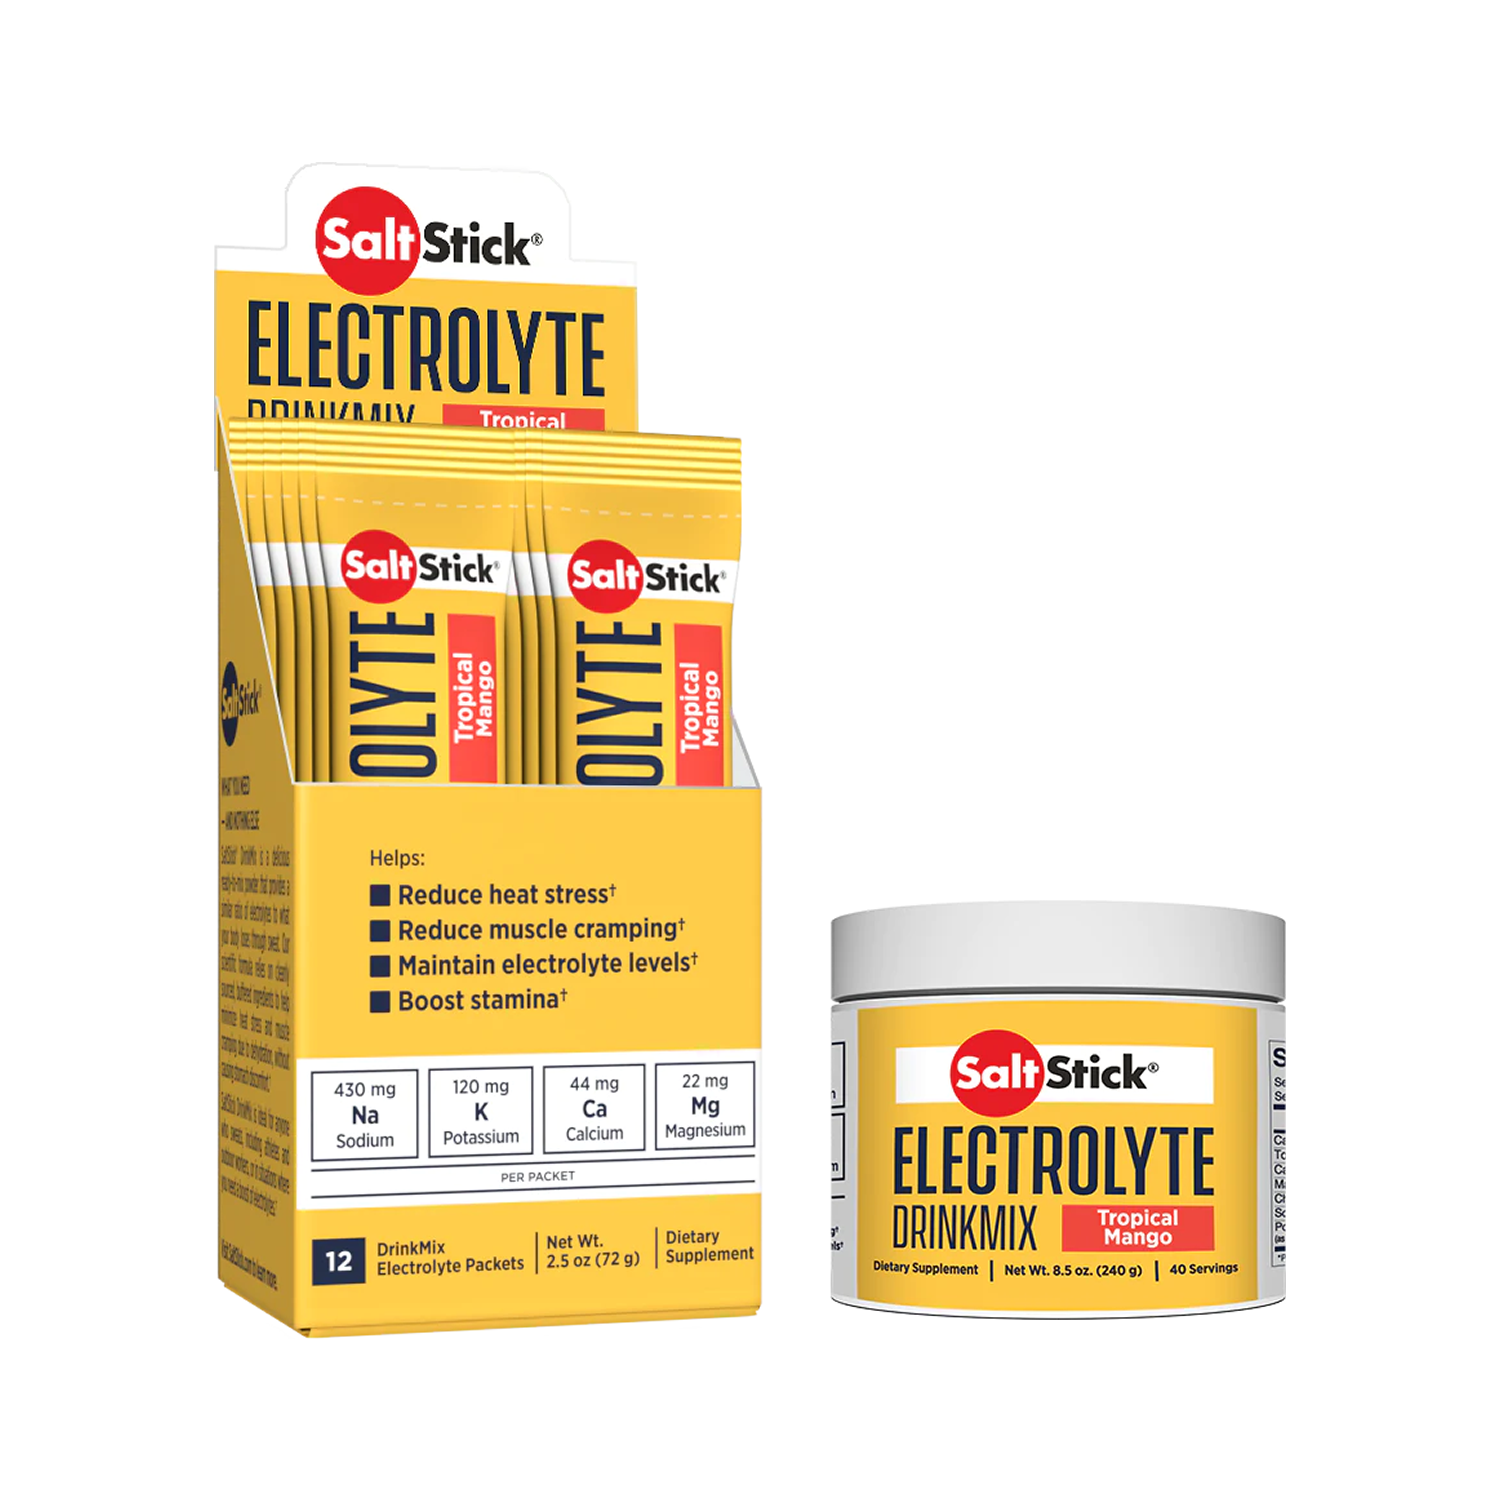 SaltStick Electrolyte Drink Mix Tropical Mango stick packets and tub